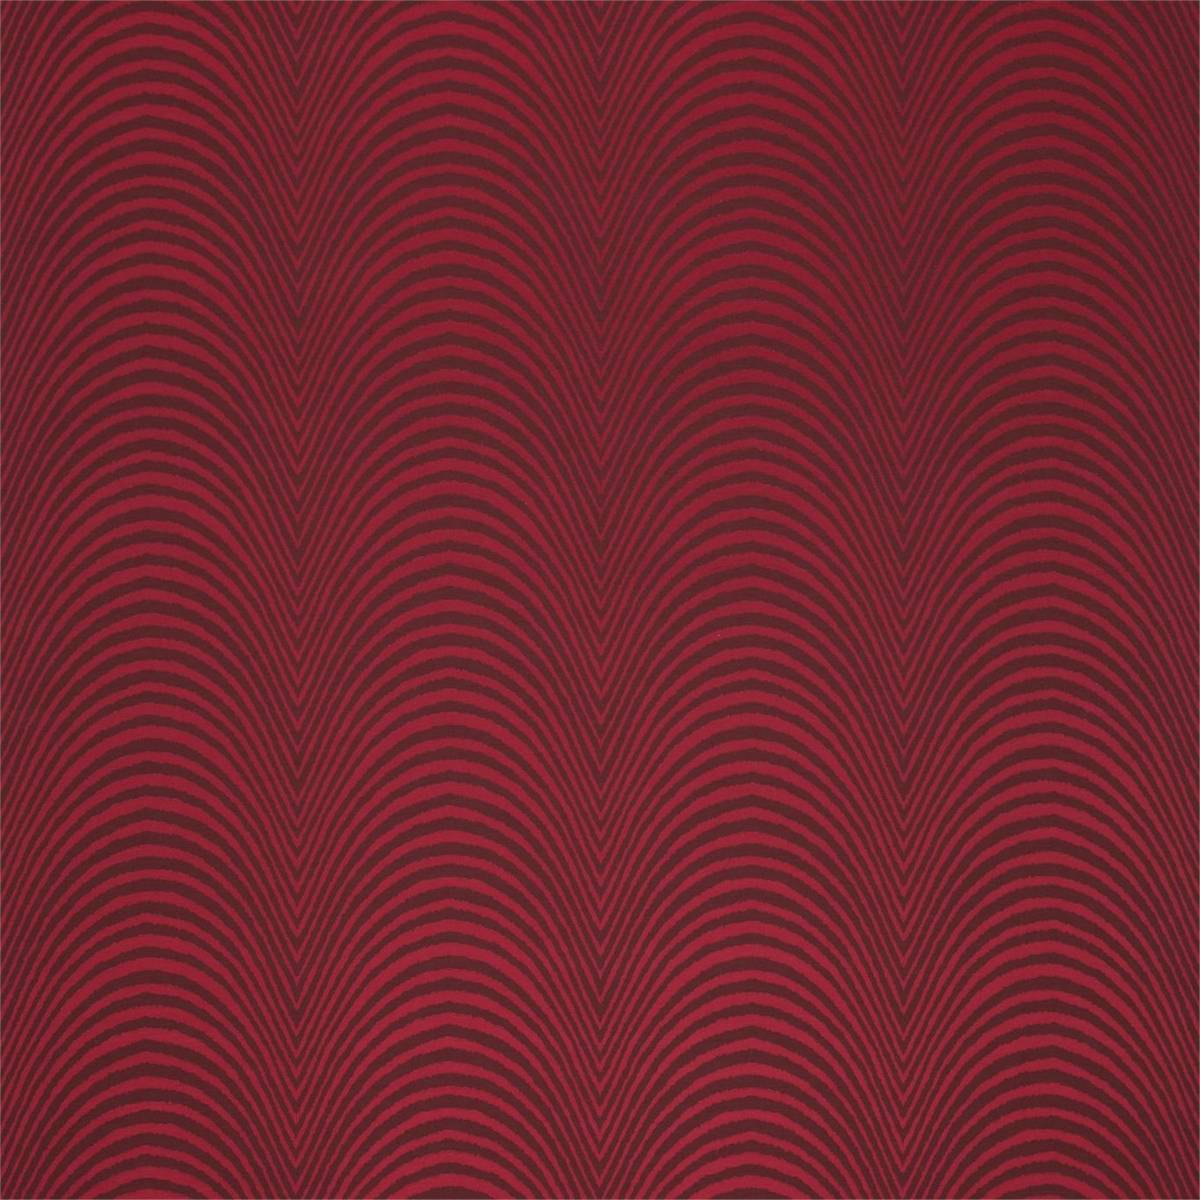 Aspect Scarlet and Chocolate Fabric by Harlequin